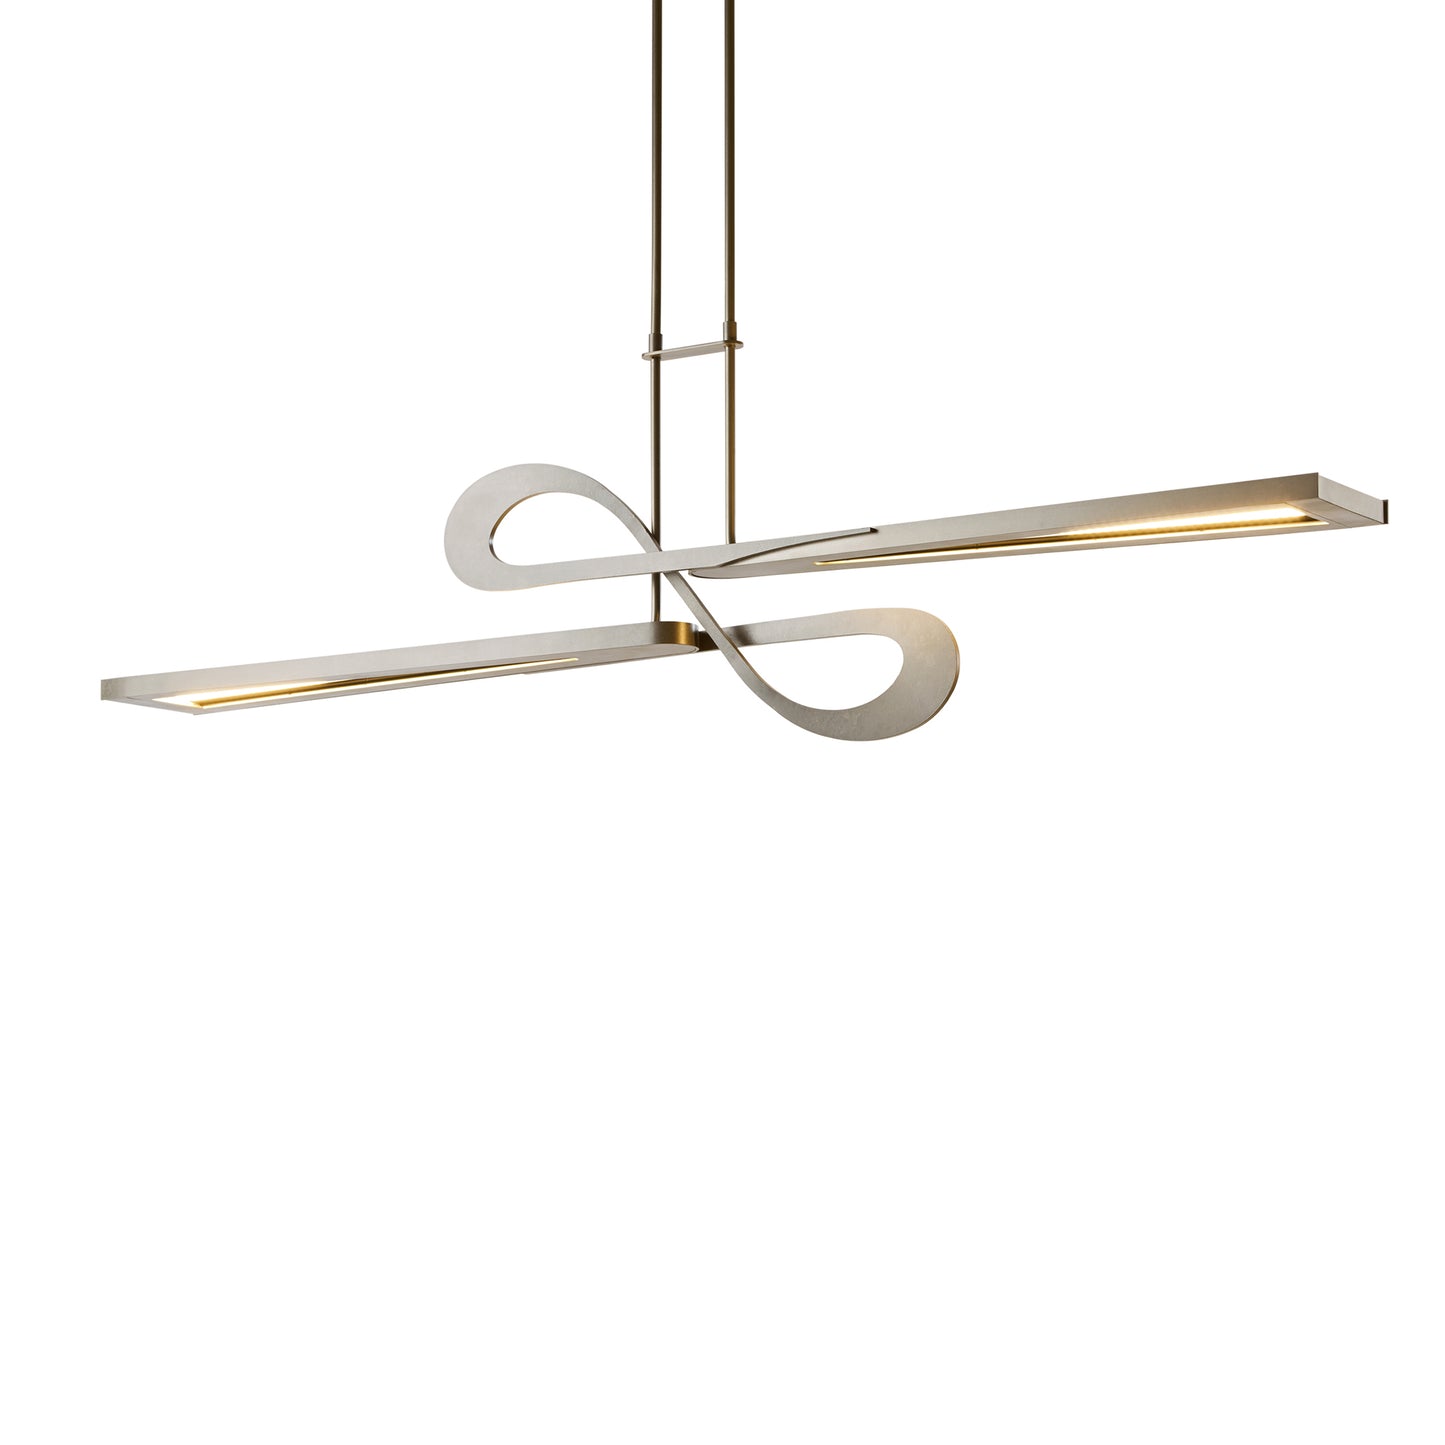 A Switchback Pendant by Hubbardton Forge with a modern design.